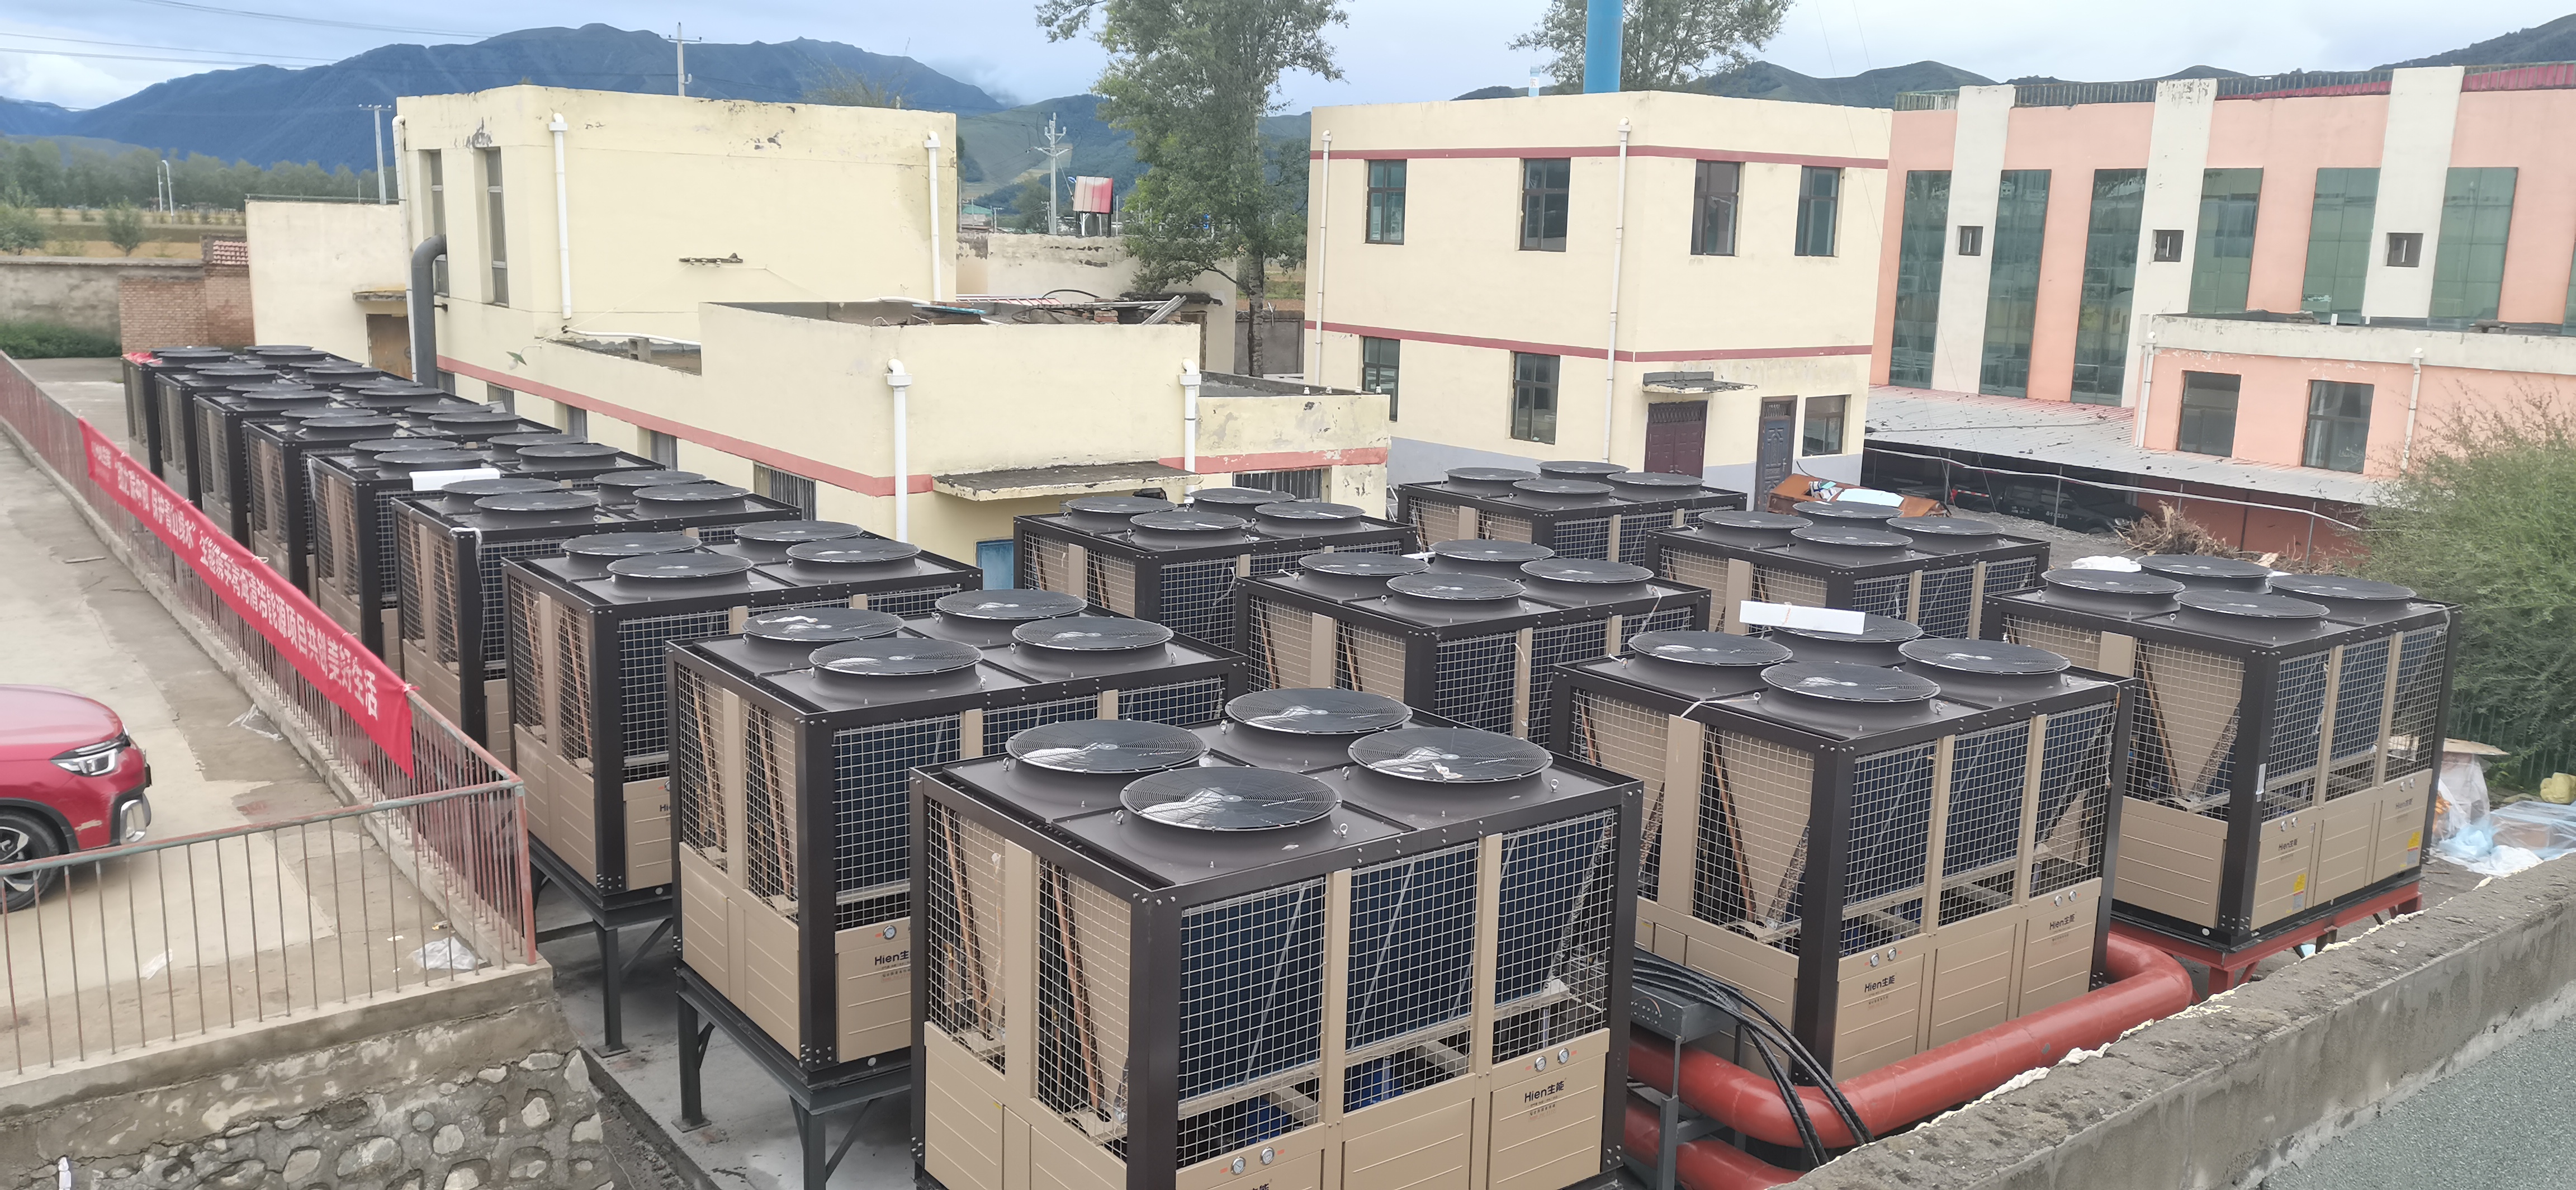 Hien’s Super Large Air Source Heat Pump Units Assist the 24800 ㎡ Heating Upgrade of Dongchuan Town Boarding Primary School in Qinghai Province.